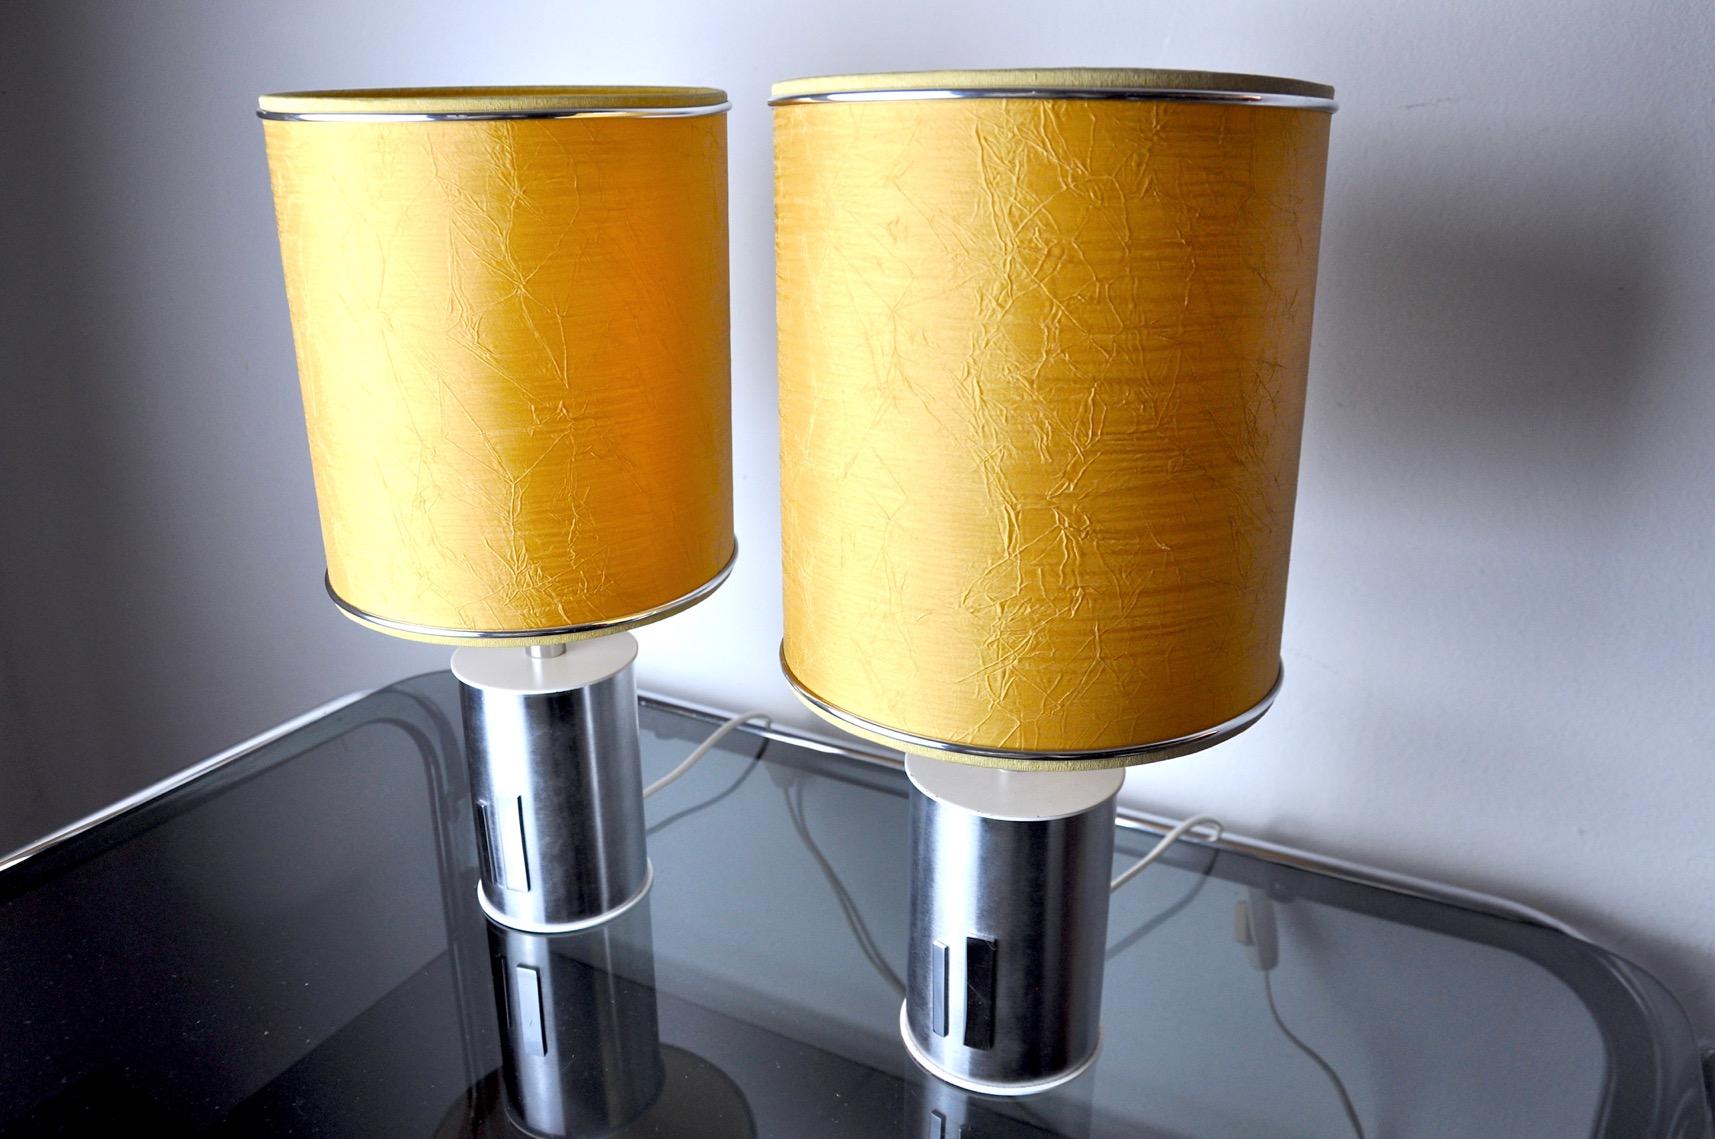 Spanish Pair of futuristic lamps by Marca SL, Spain, 1970s For Sale